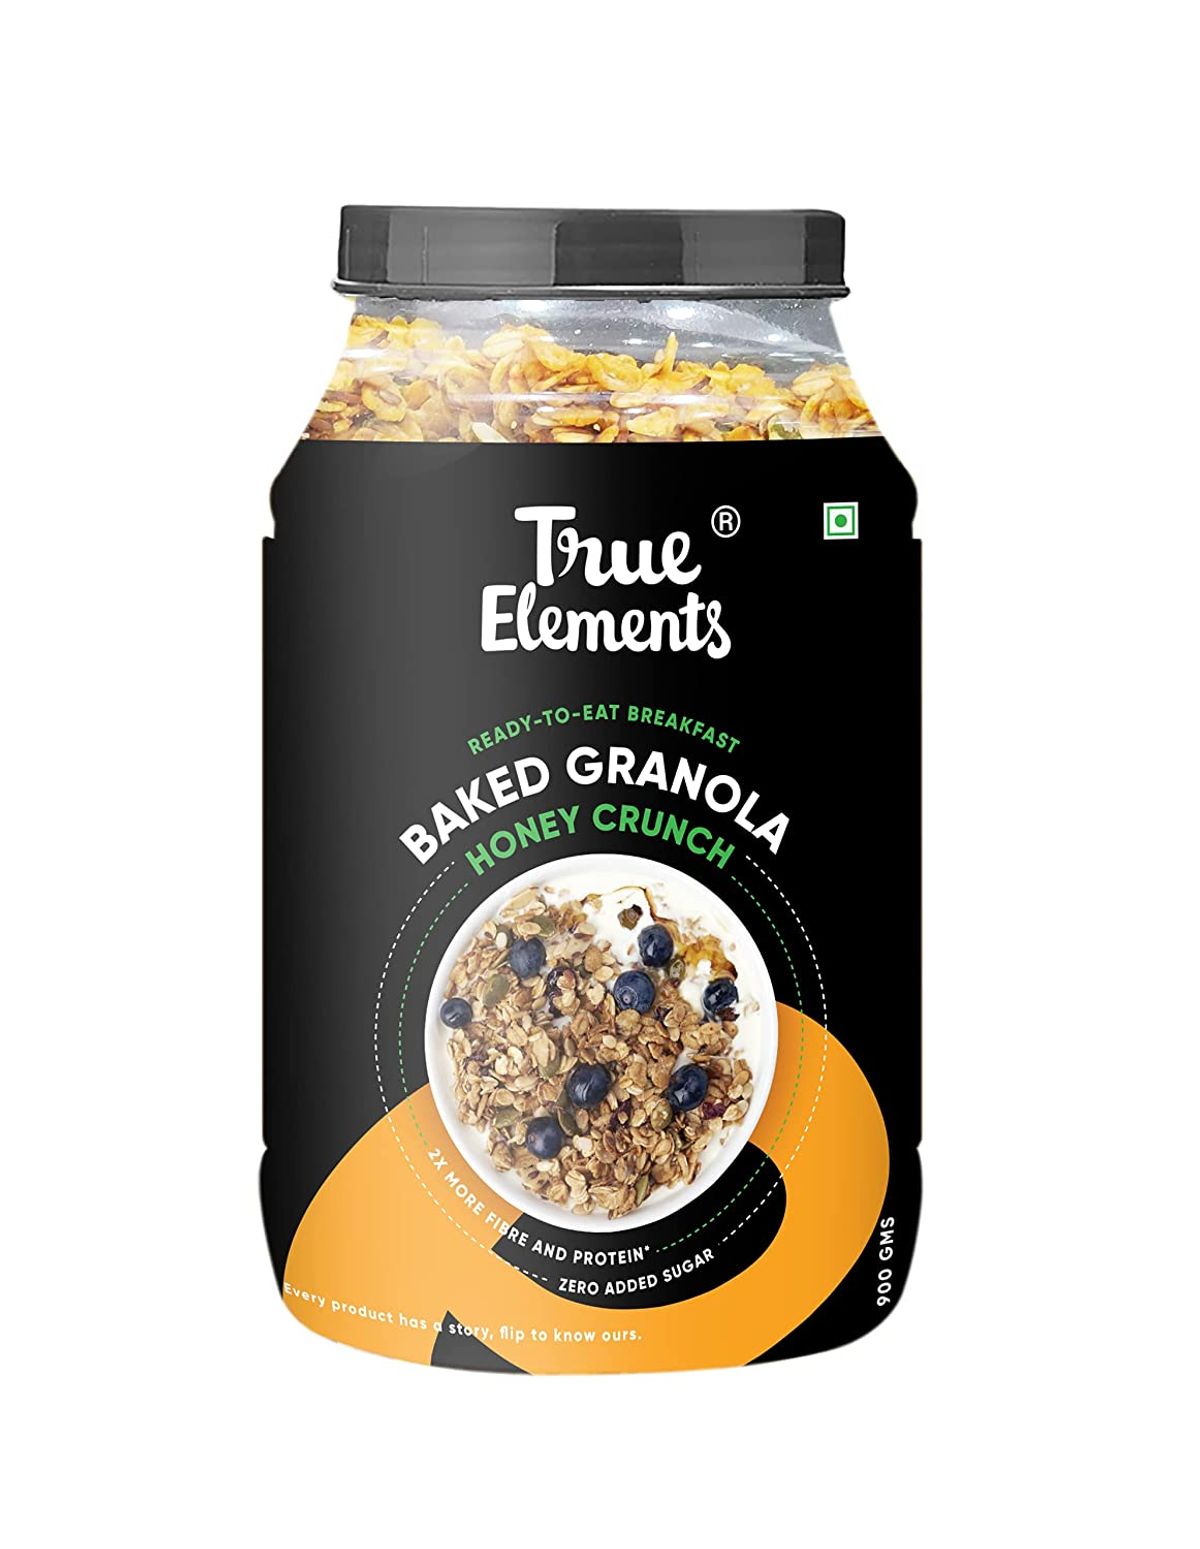 True Elements Baked Granola With Almonds And Cranberries Honey Granola Image